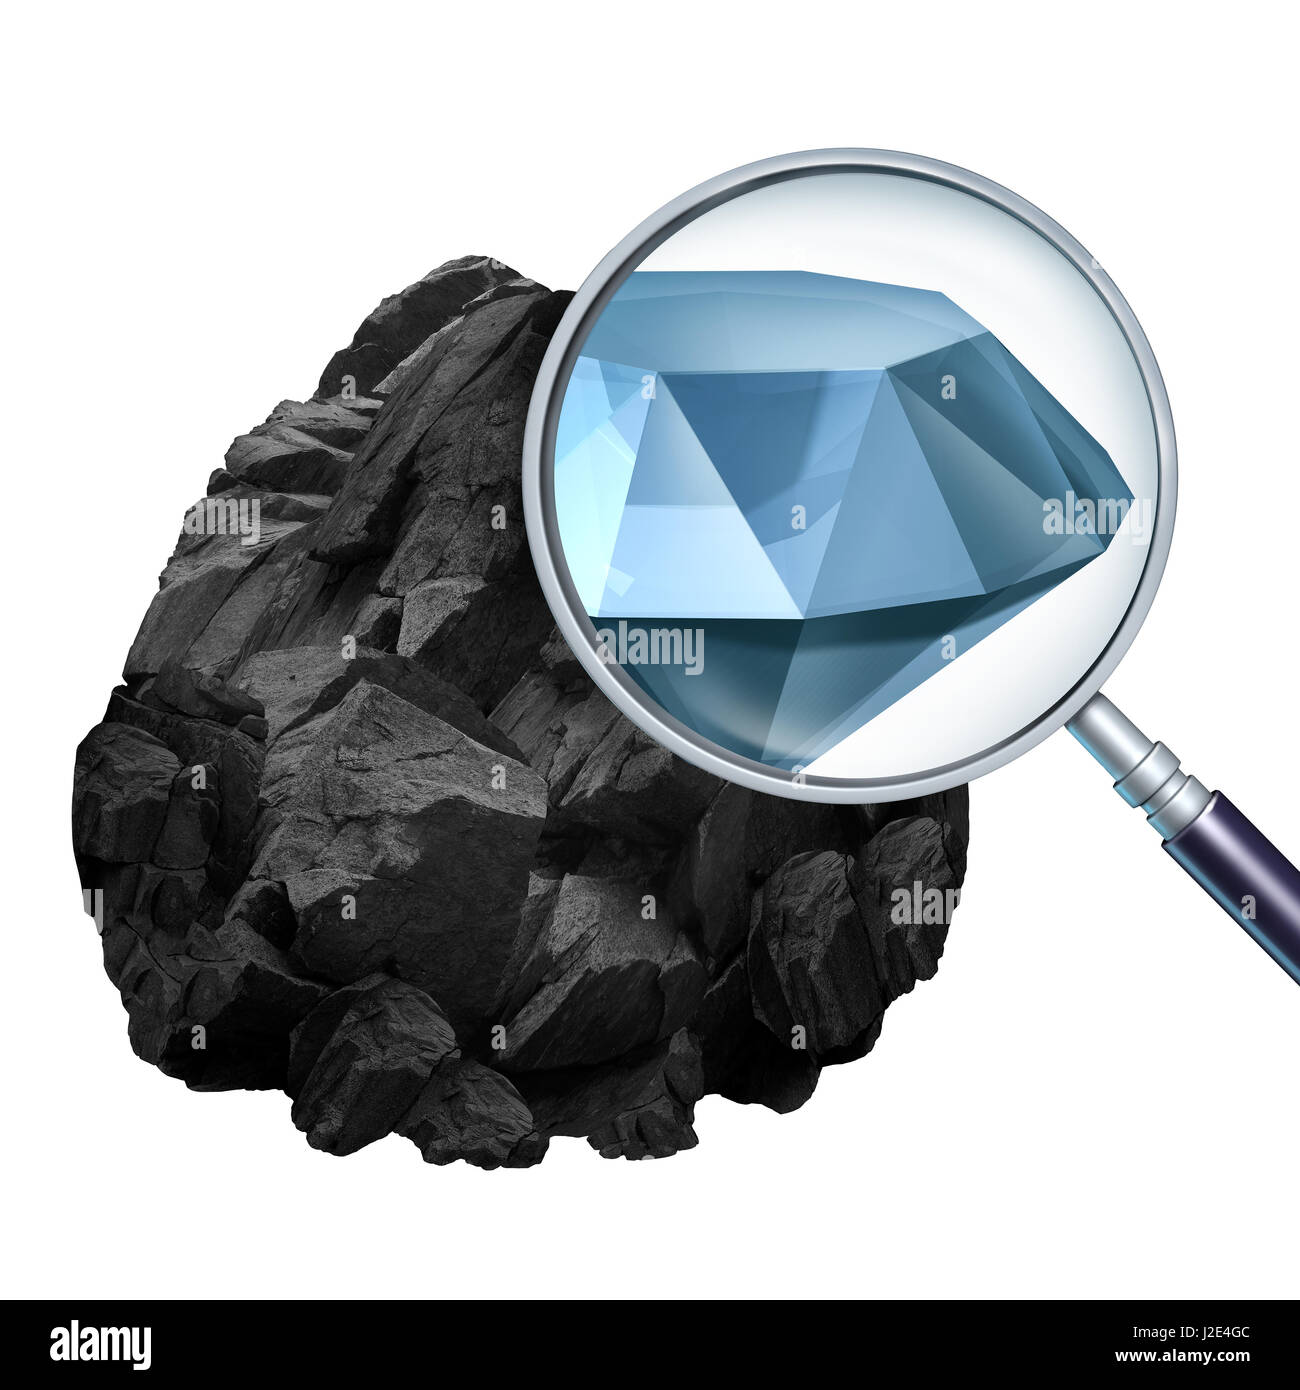 Searching for value and discovering or finding valuable opportunity as a magnifying glass looking into a rock and revealing an expensive diamond. Stock Photo